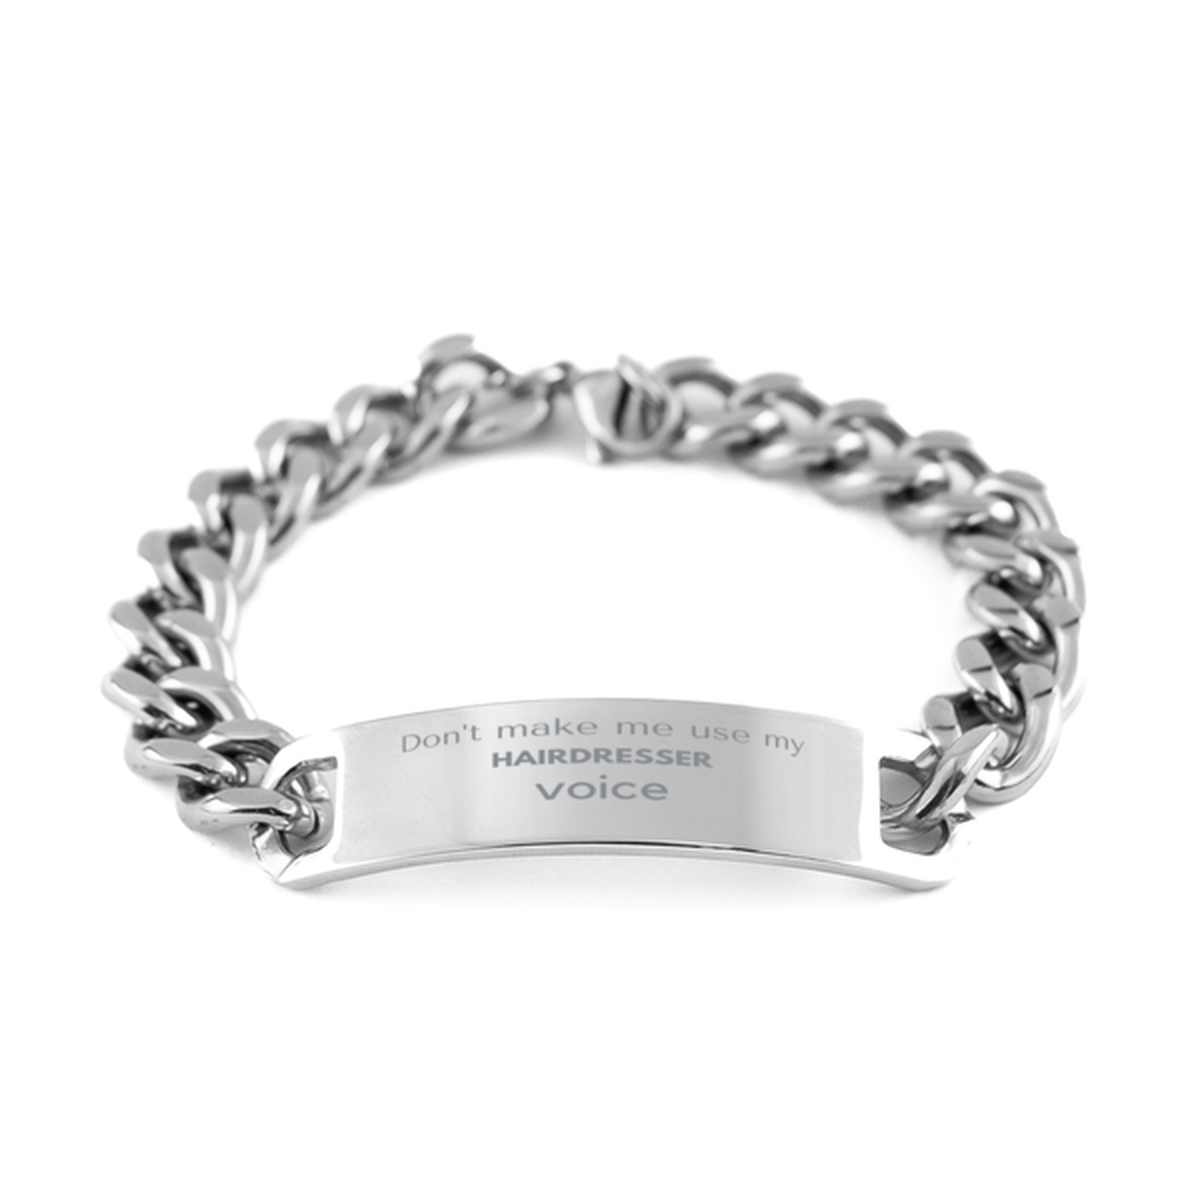 Don't make me use my Hairdresser voice, Sarcasm Hairdresser Gifts, Christmas Hairdresser Cuban Chain Stainless Steel Bracelet Birthday Unique Gifts For Hairdresser Coworkers, Men, Women, Colleague, Friends